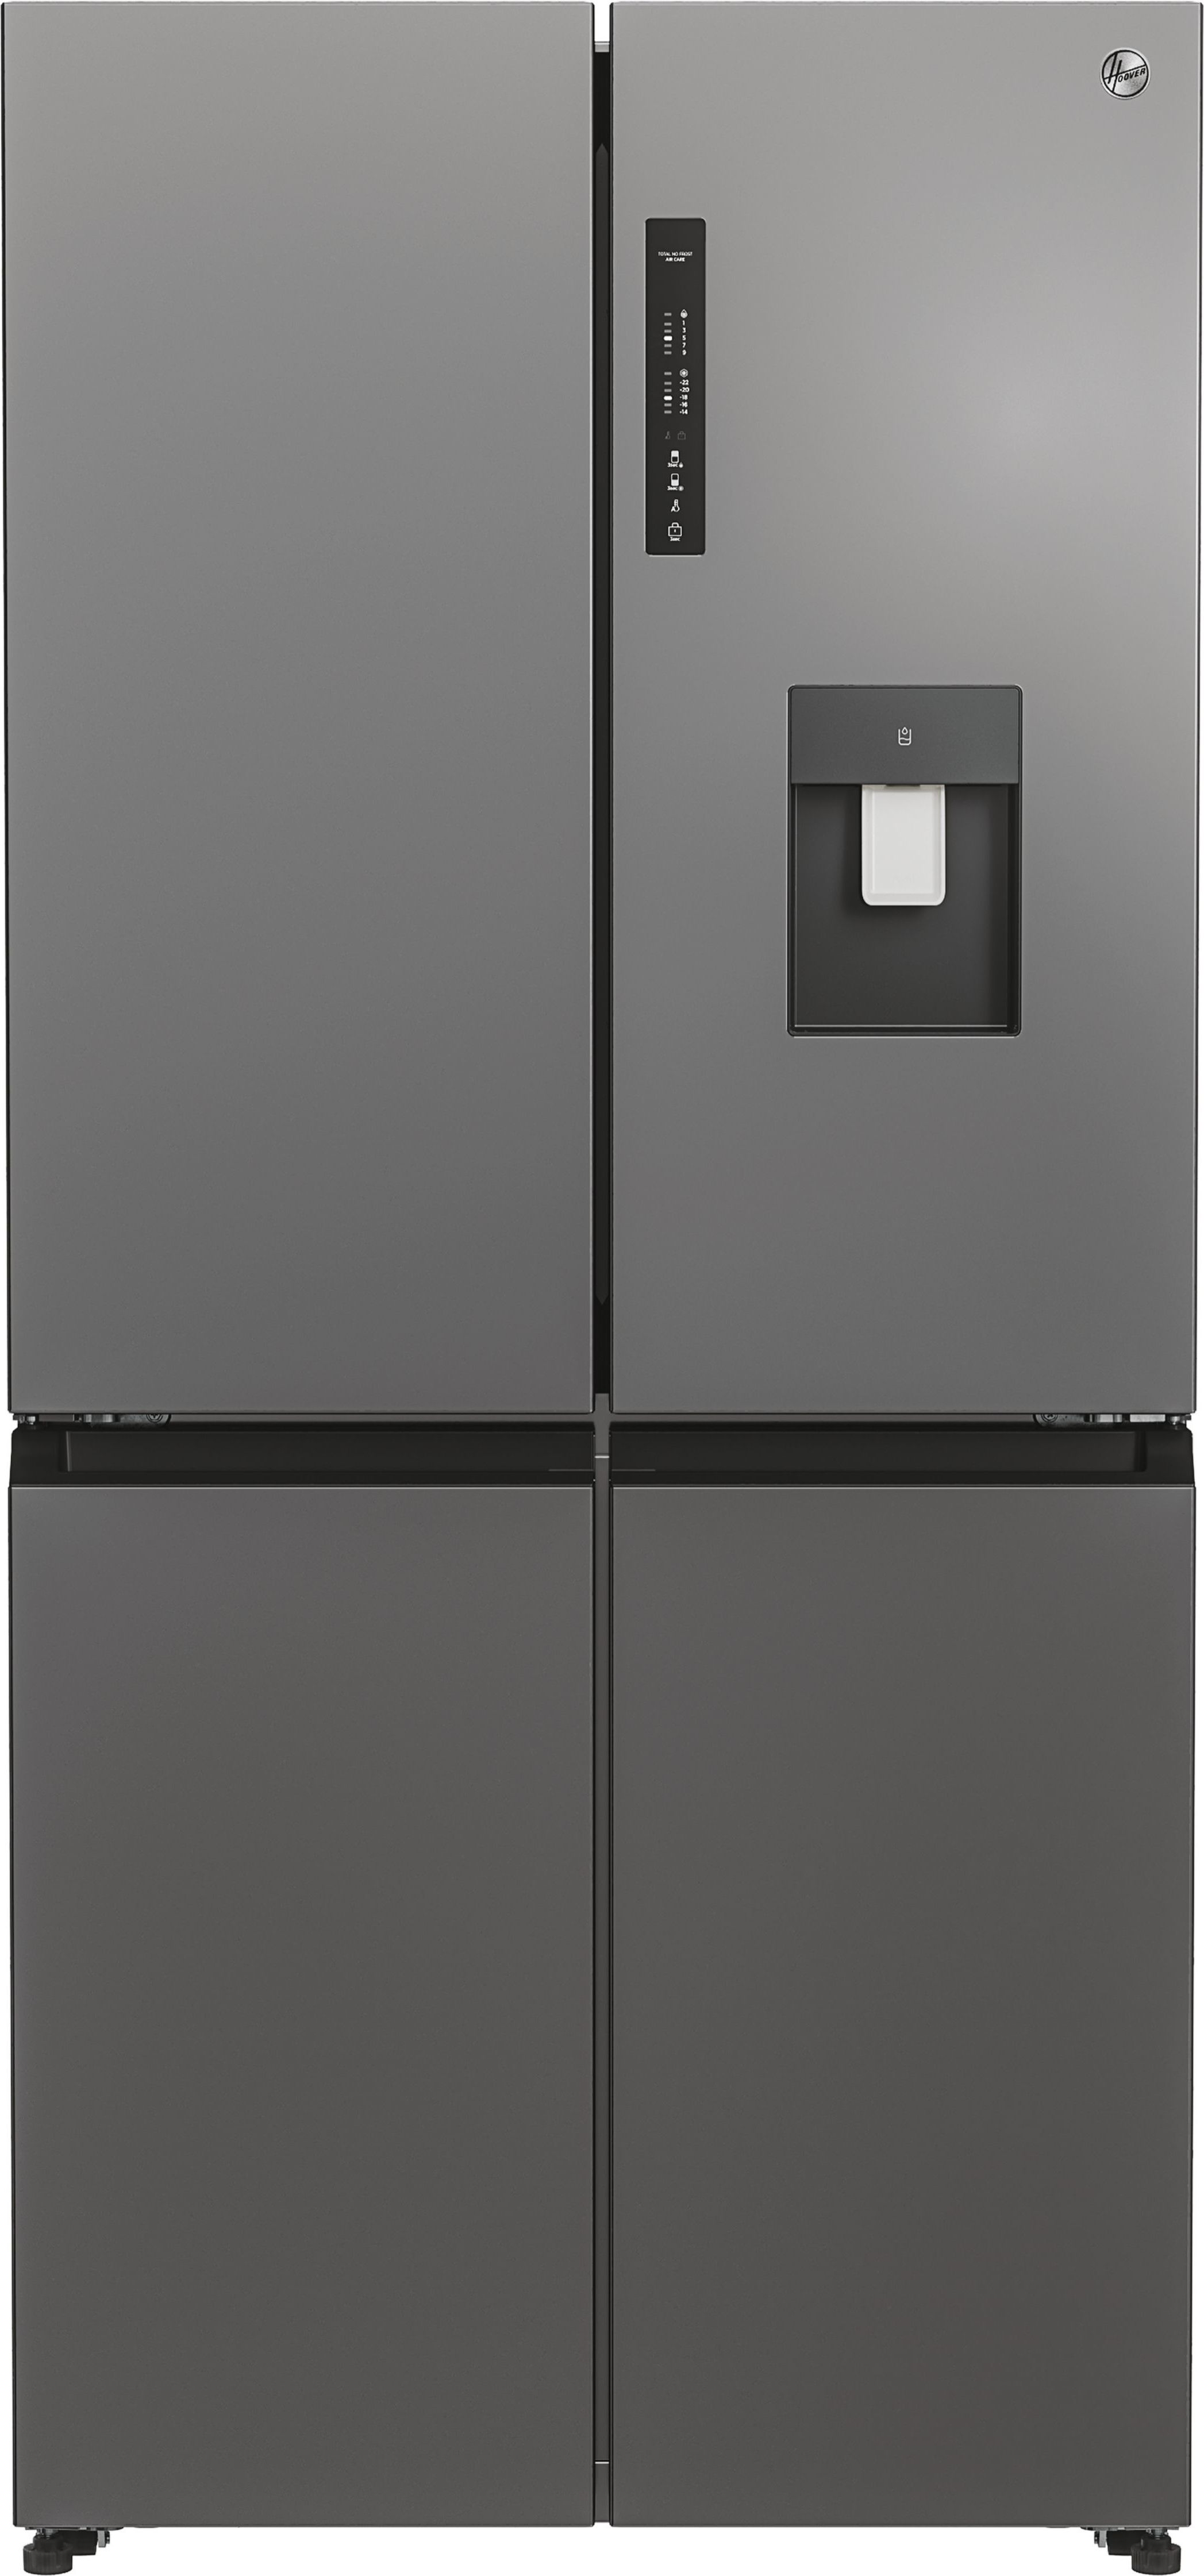 Hoover HHCR3818EWPL Non-Plumbed Total No Frost American Fridge Freezer - Inox - E Rated, Stainless Steel